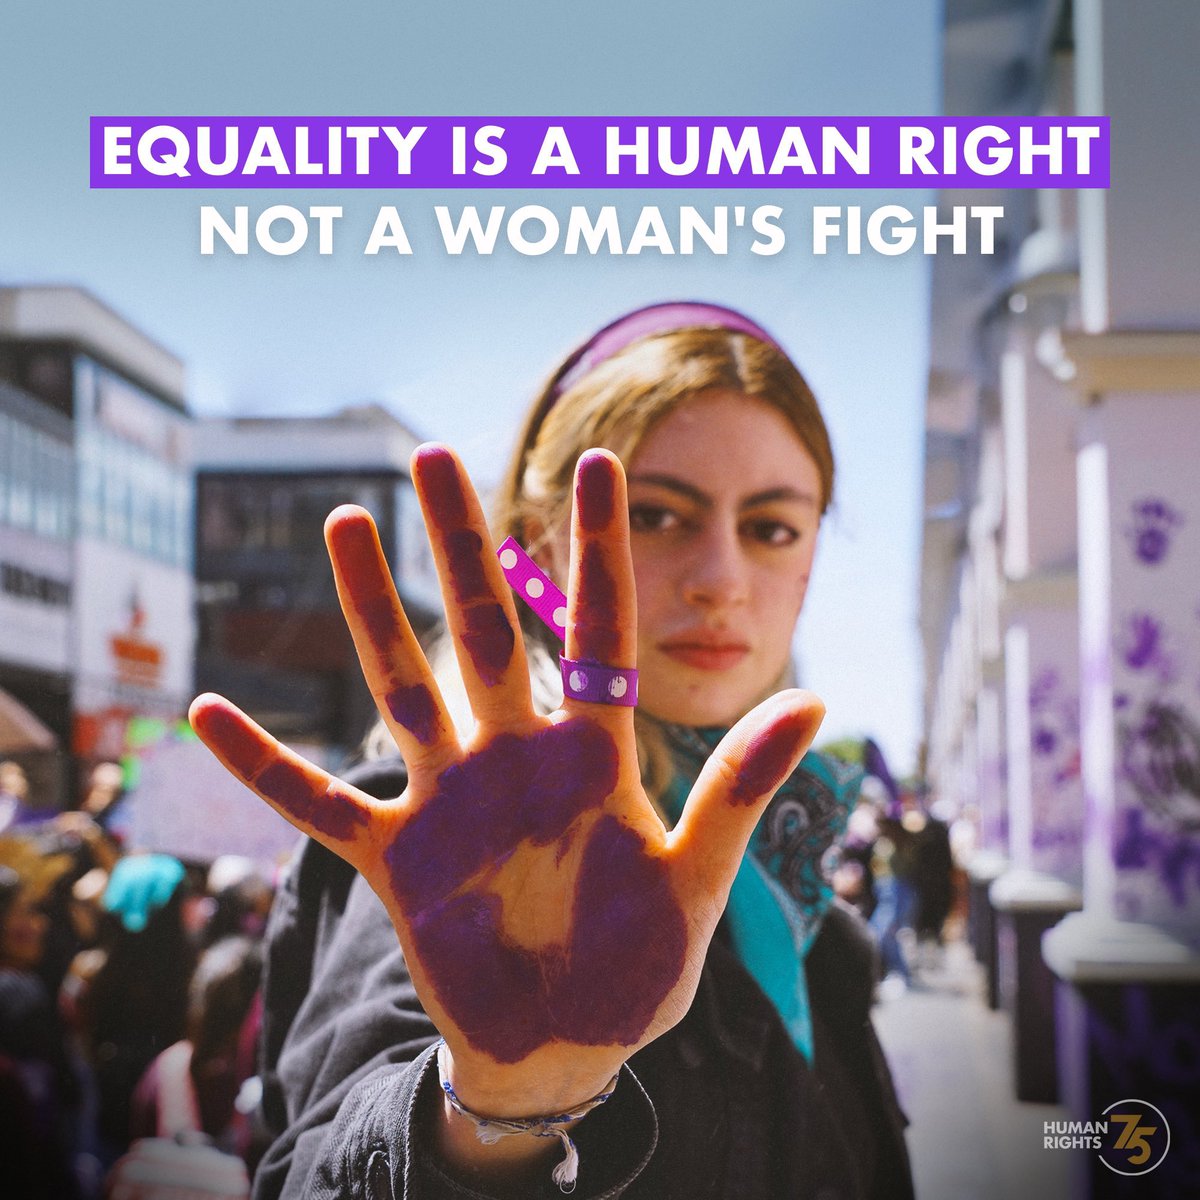 Gender equality is synonymous with human rights. Violence against women and girls remains one of the most prevalent and pervasive human rights violations in the world #NoExcuse We must stand united to prevent violence against women and girls.